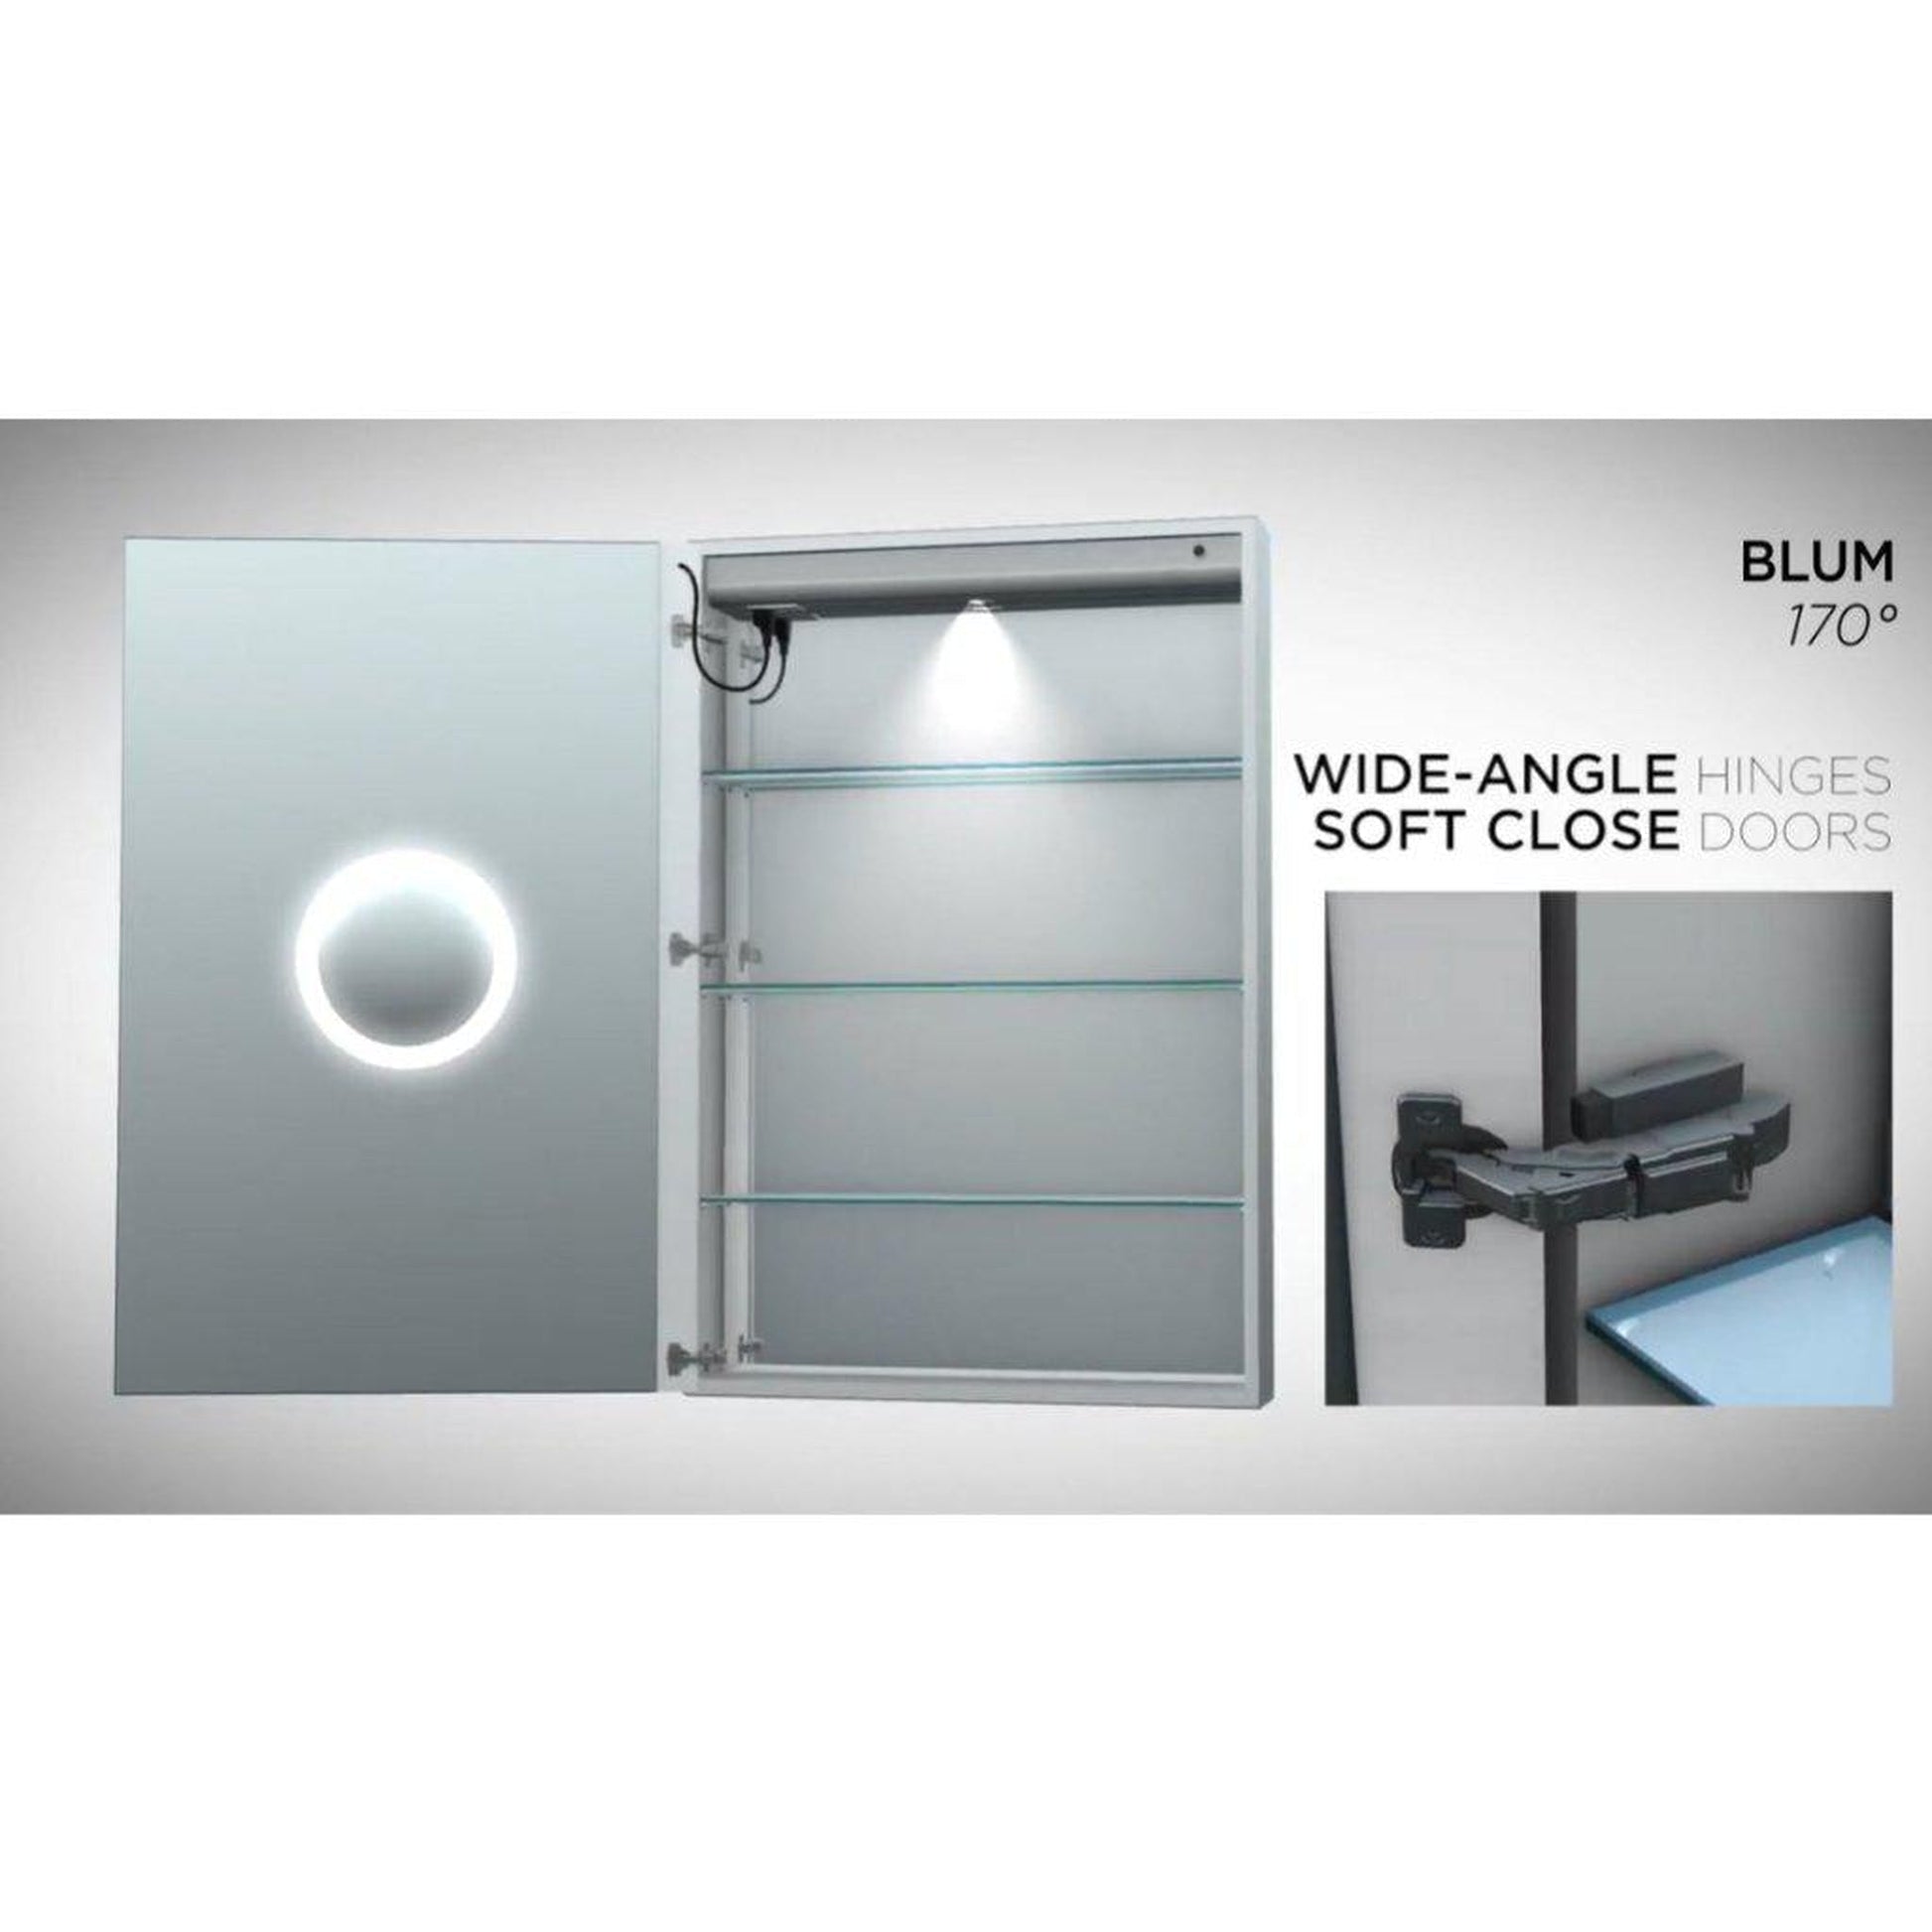 Krugg Reflections Svange 60" x 42" 5000K Double Left-Left-Right Opening Recessed/Surface-Mount Illuminated Silver Backed LED Medicine Cabinet Mirror With Built-in Defogger, Dimmer and Electrical Outlet